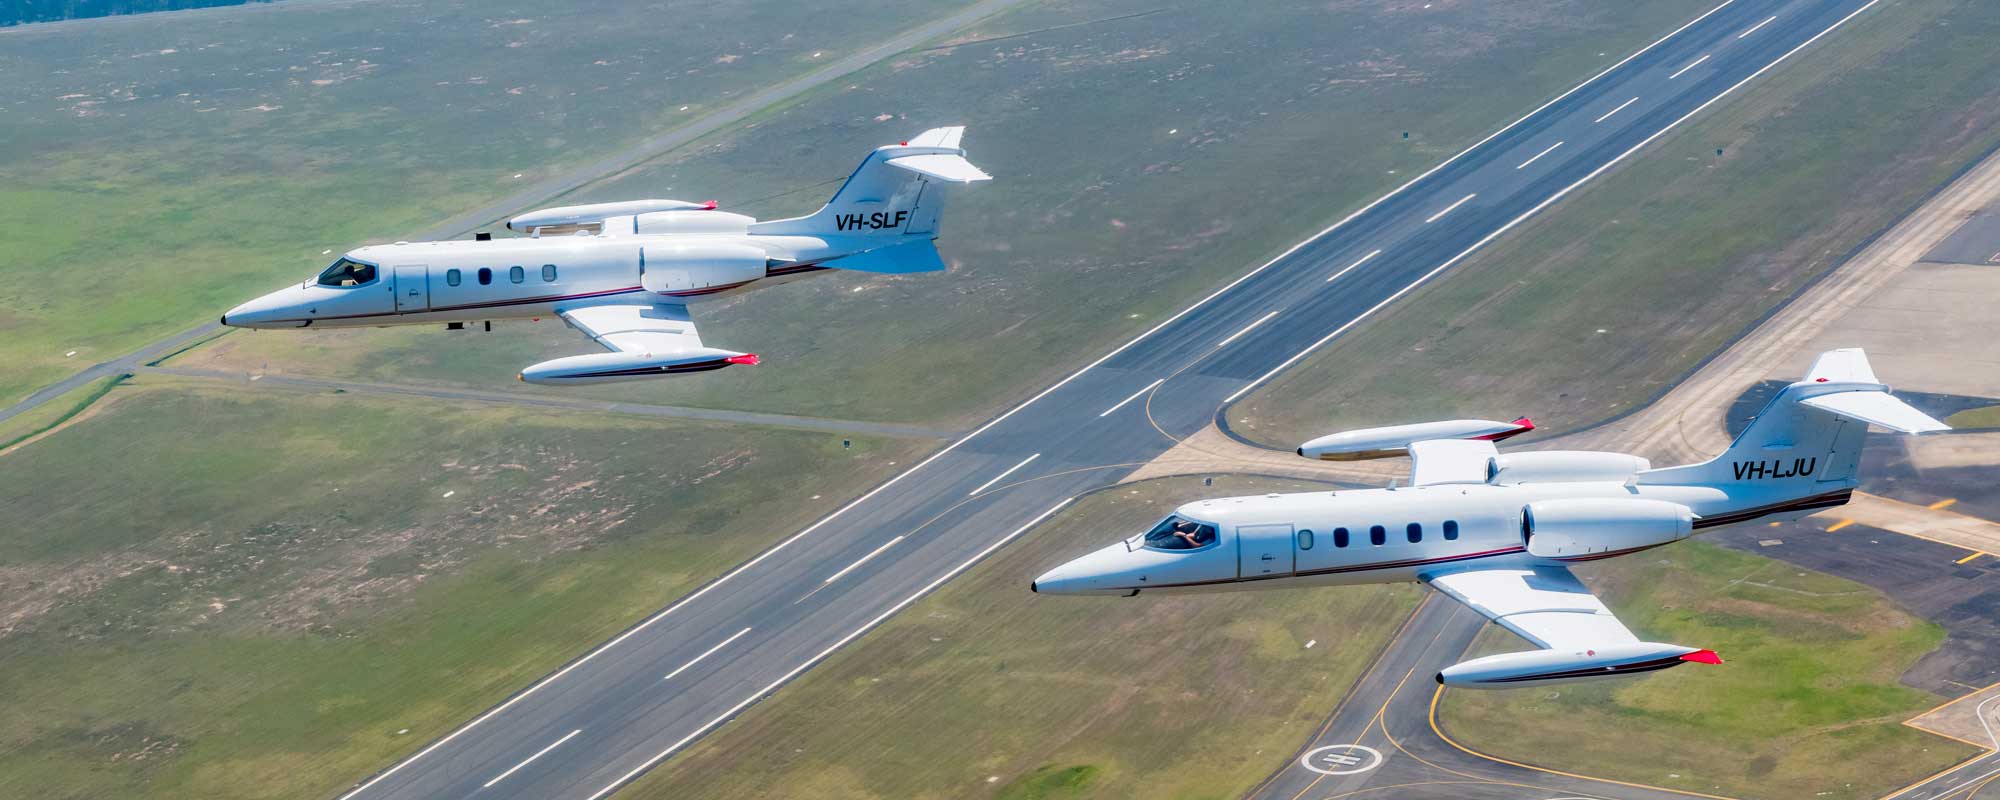 Special Mission Learjet Aircraft